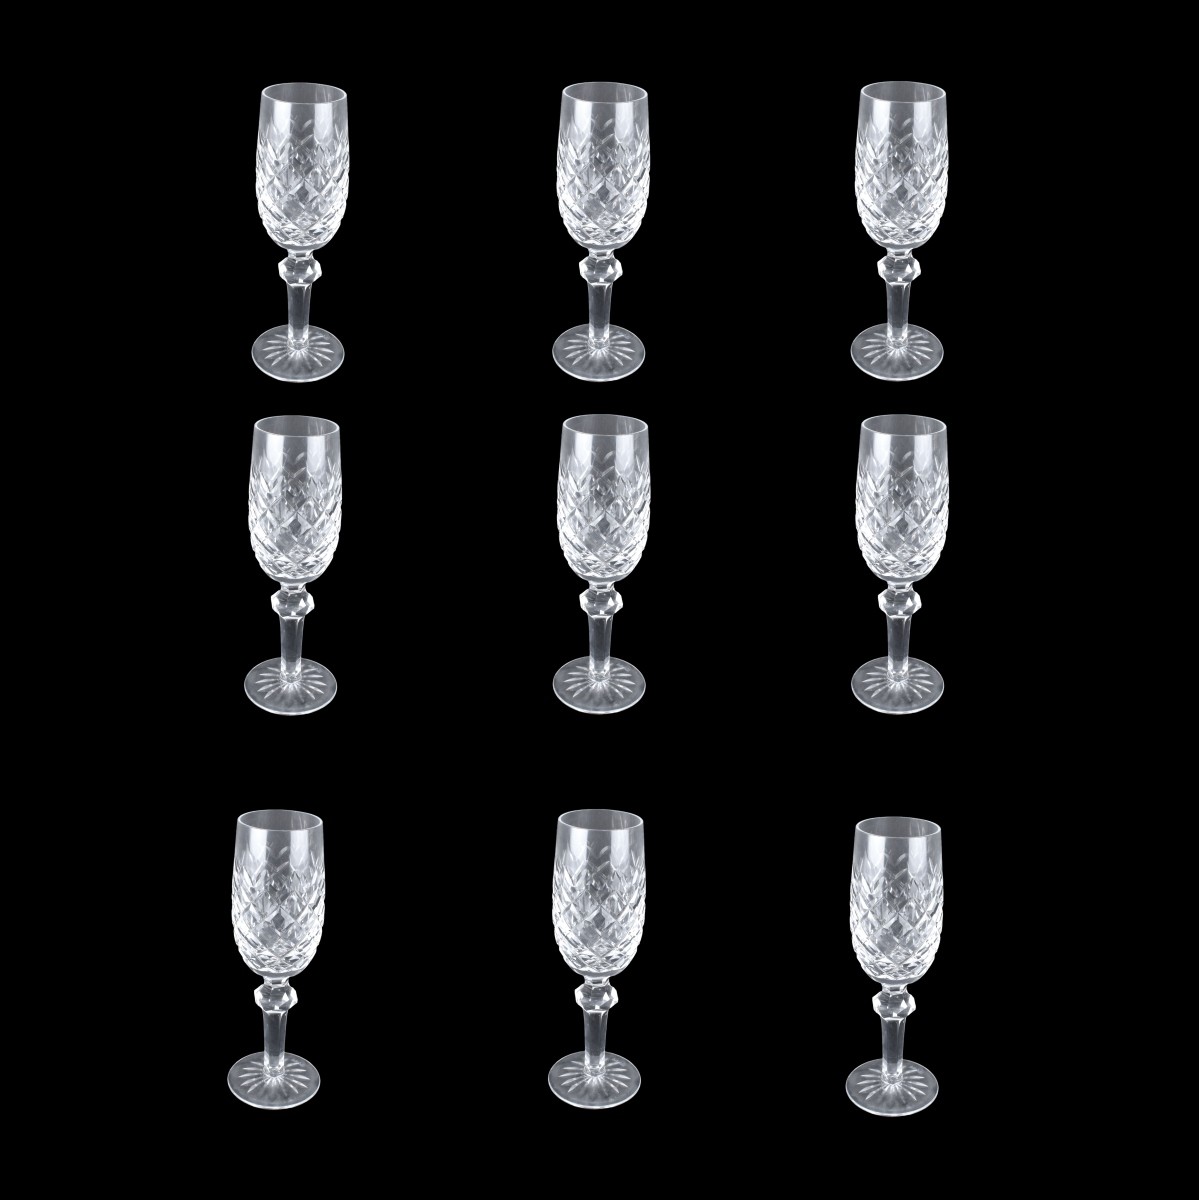 Waterford "Powerscourt" Fluted Champagne Glasses